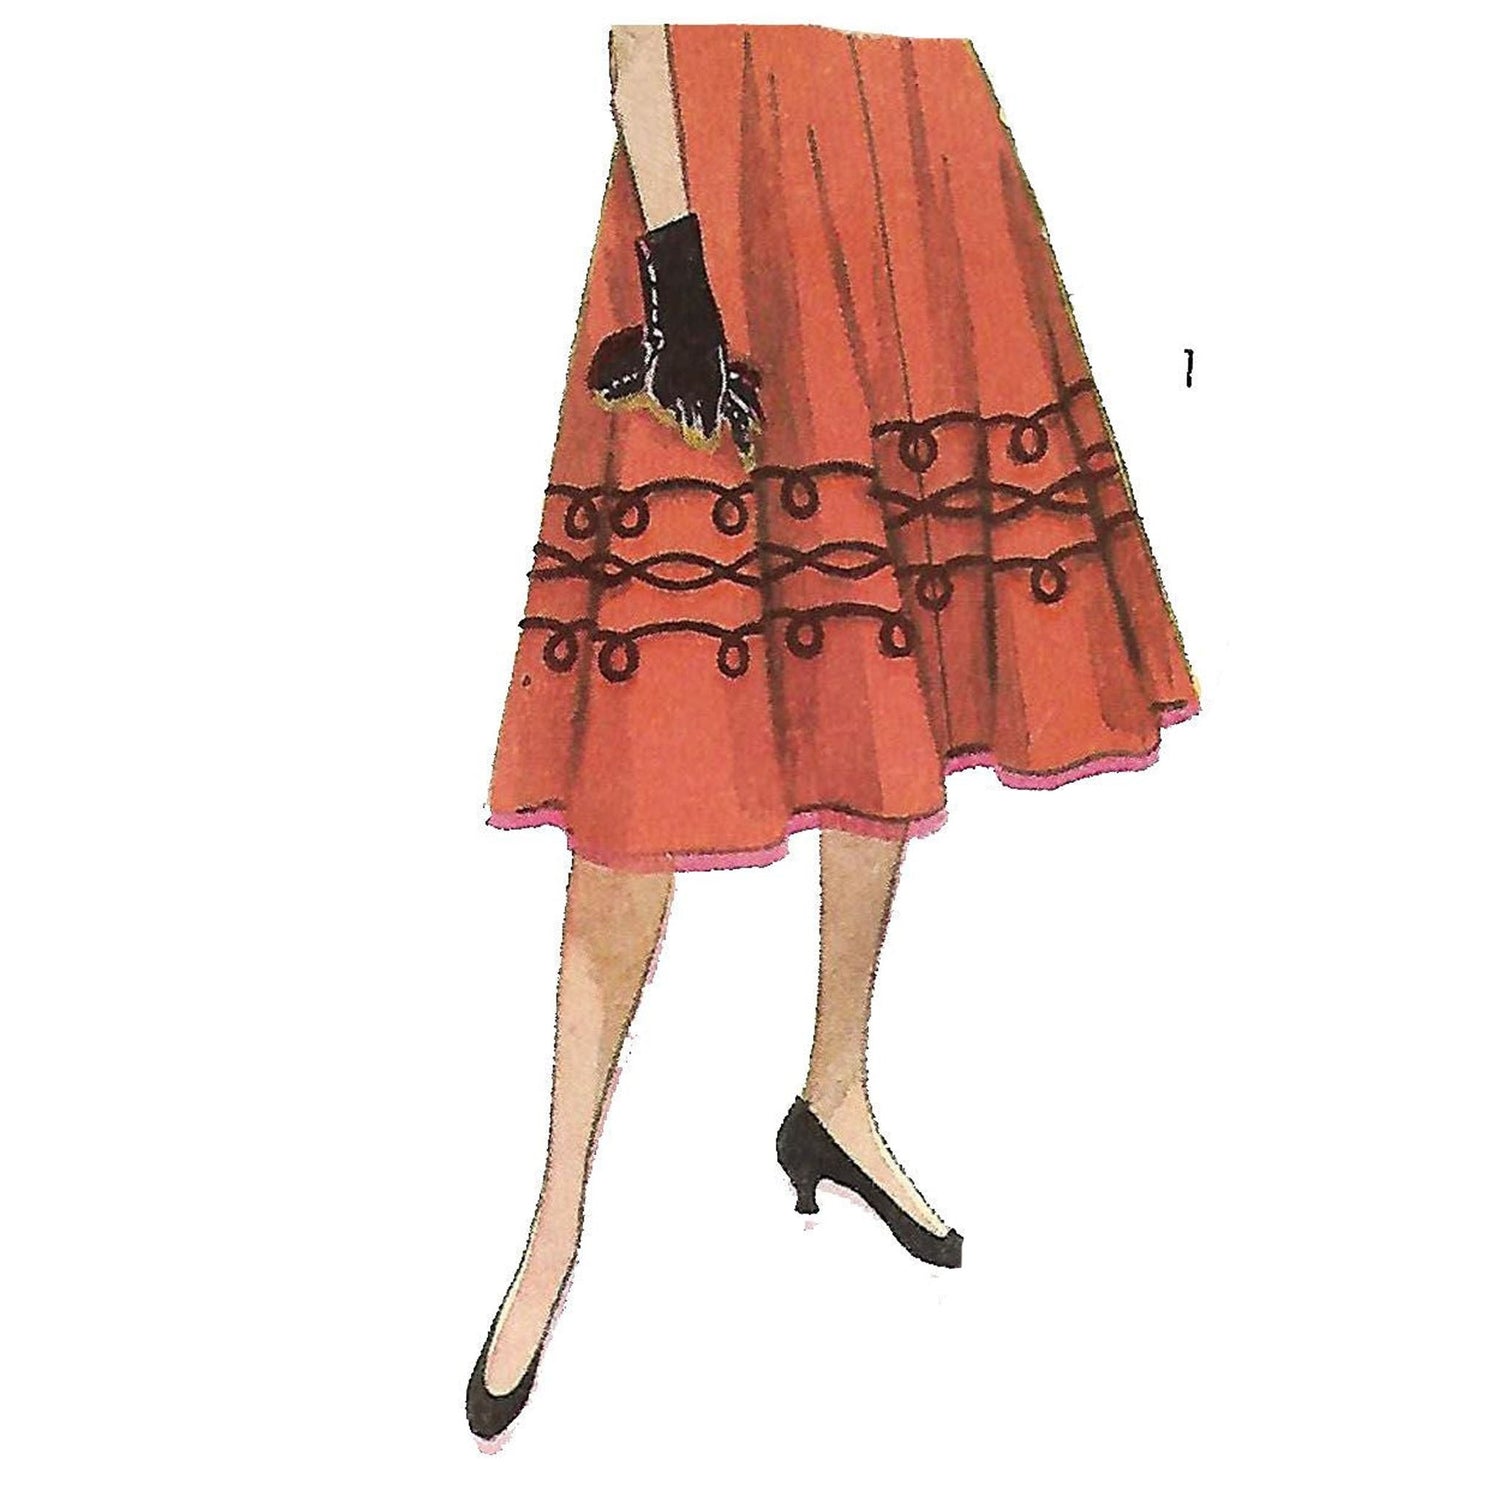 Model wearing 1950s skirt and overskirt, transfer included made from Simplicity 3686 pattern